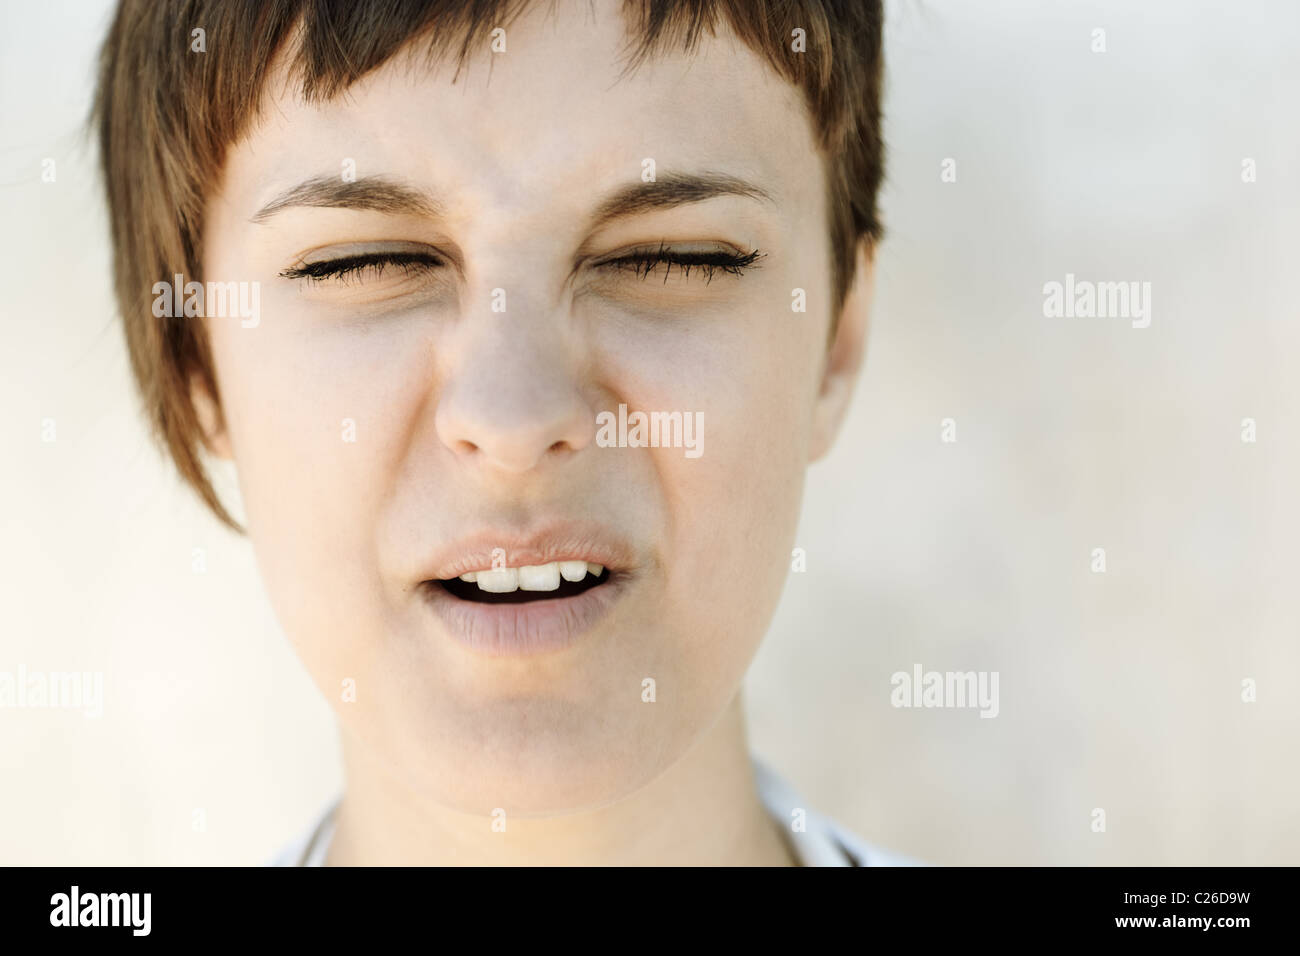 young woman making face Stock Photo